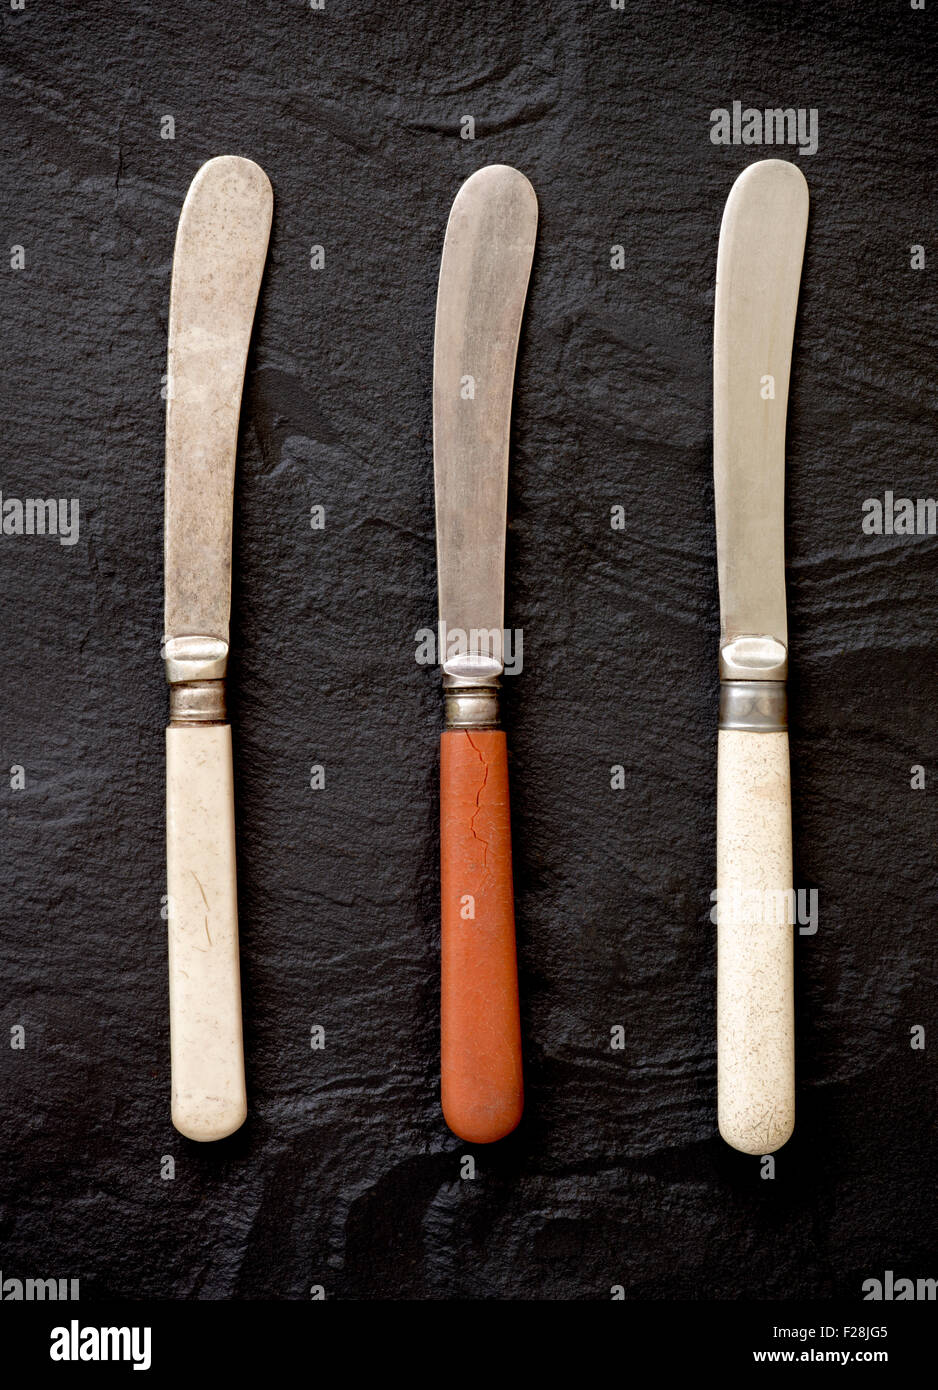 Three Old or Vintage Butter Knives Stock Photo